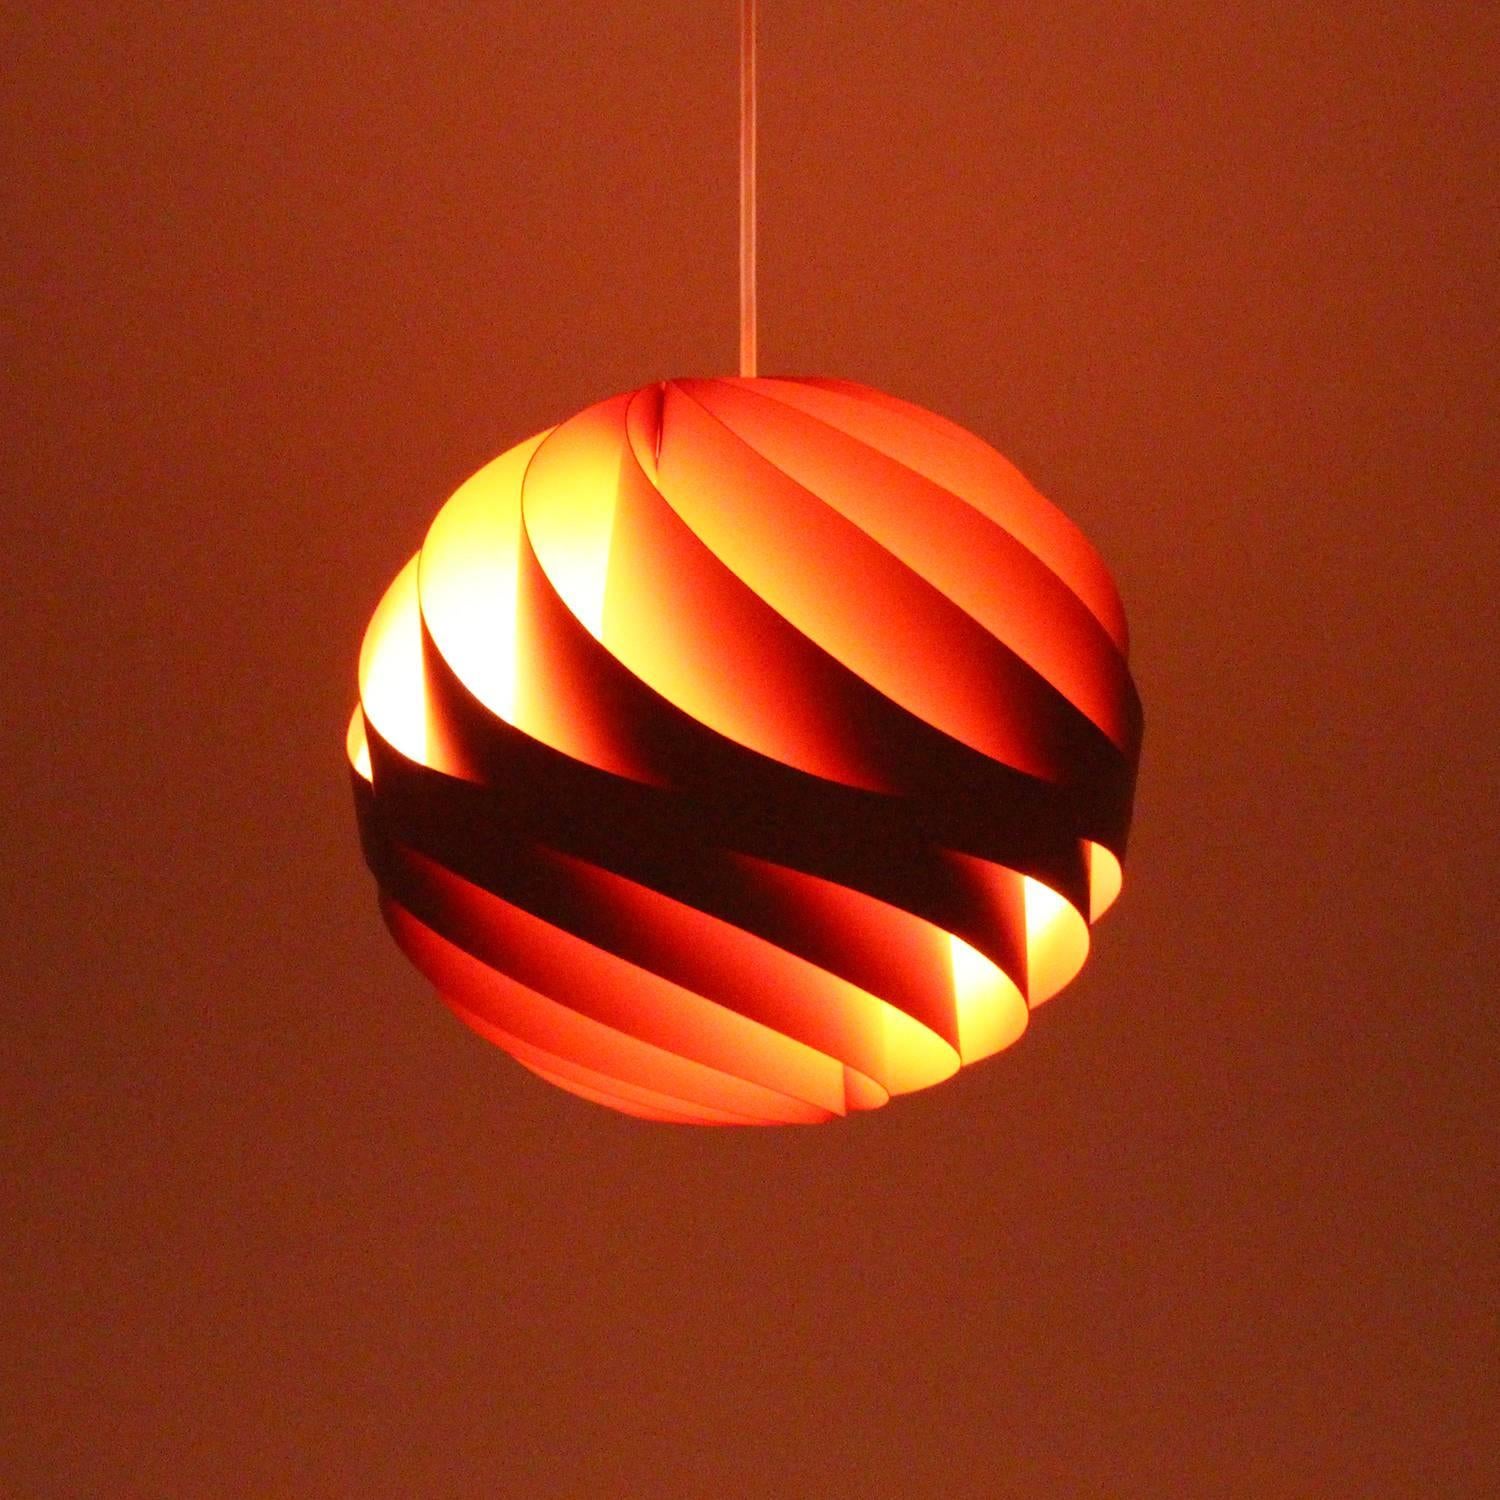 Turbo I, rare orange pendant by Louis Weisdorf in 1965 and produced by Lyfa from 1967, extremely rare vintage and super attractive Danish Mid-Century design masterpiece!

12 thin aluminum lamellae elegantly spiral twisted and intertwined to form a